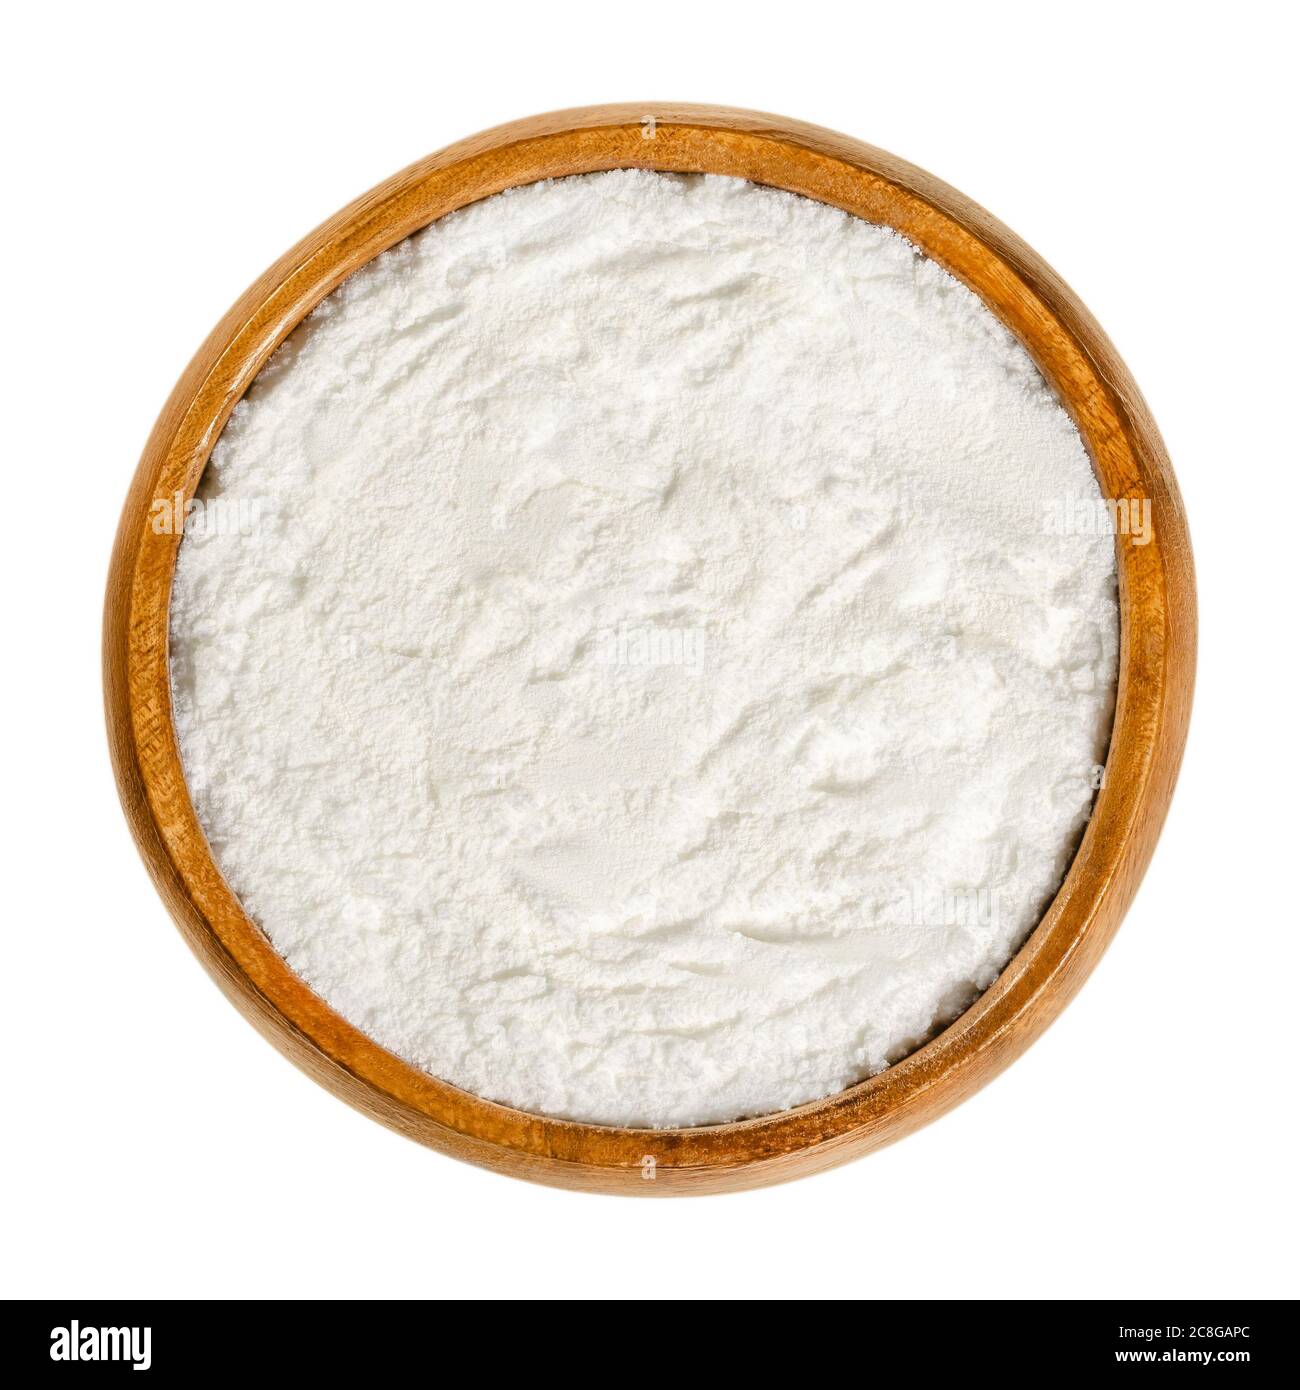 Baking powder in wooden bowl. White, dry chemical leavening agent. Mixture of carbonate or bicarbonate and weak acid. Stock Photo